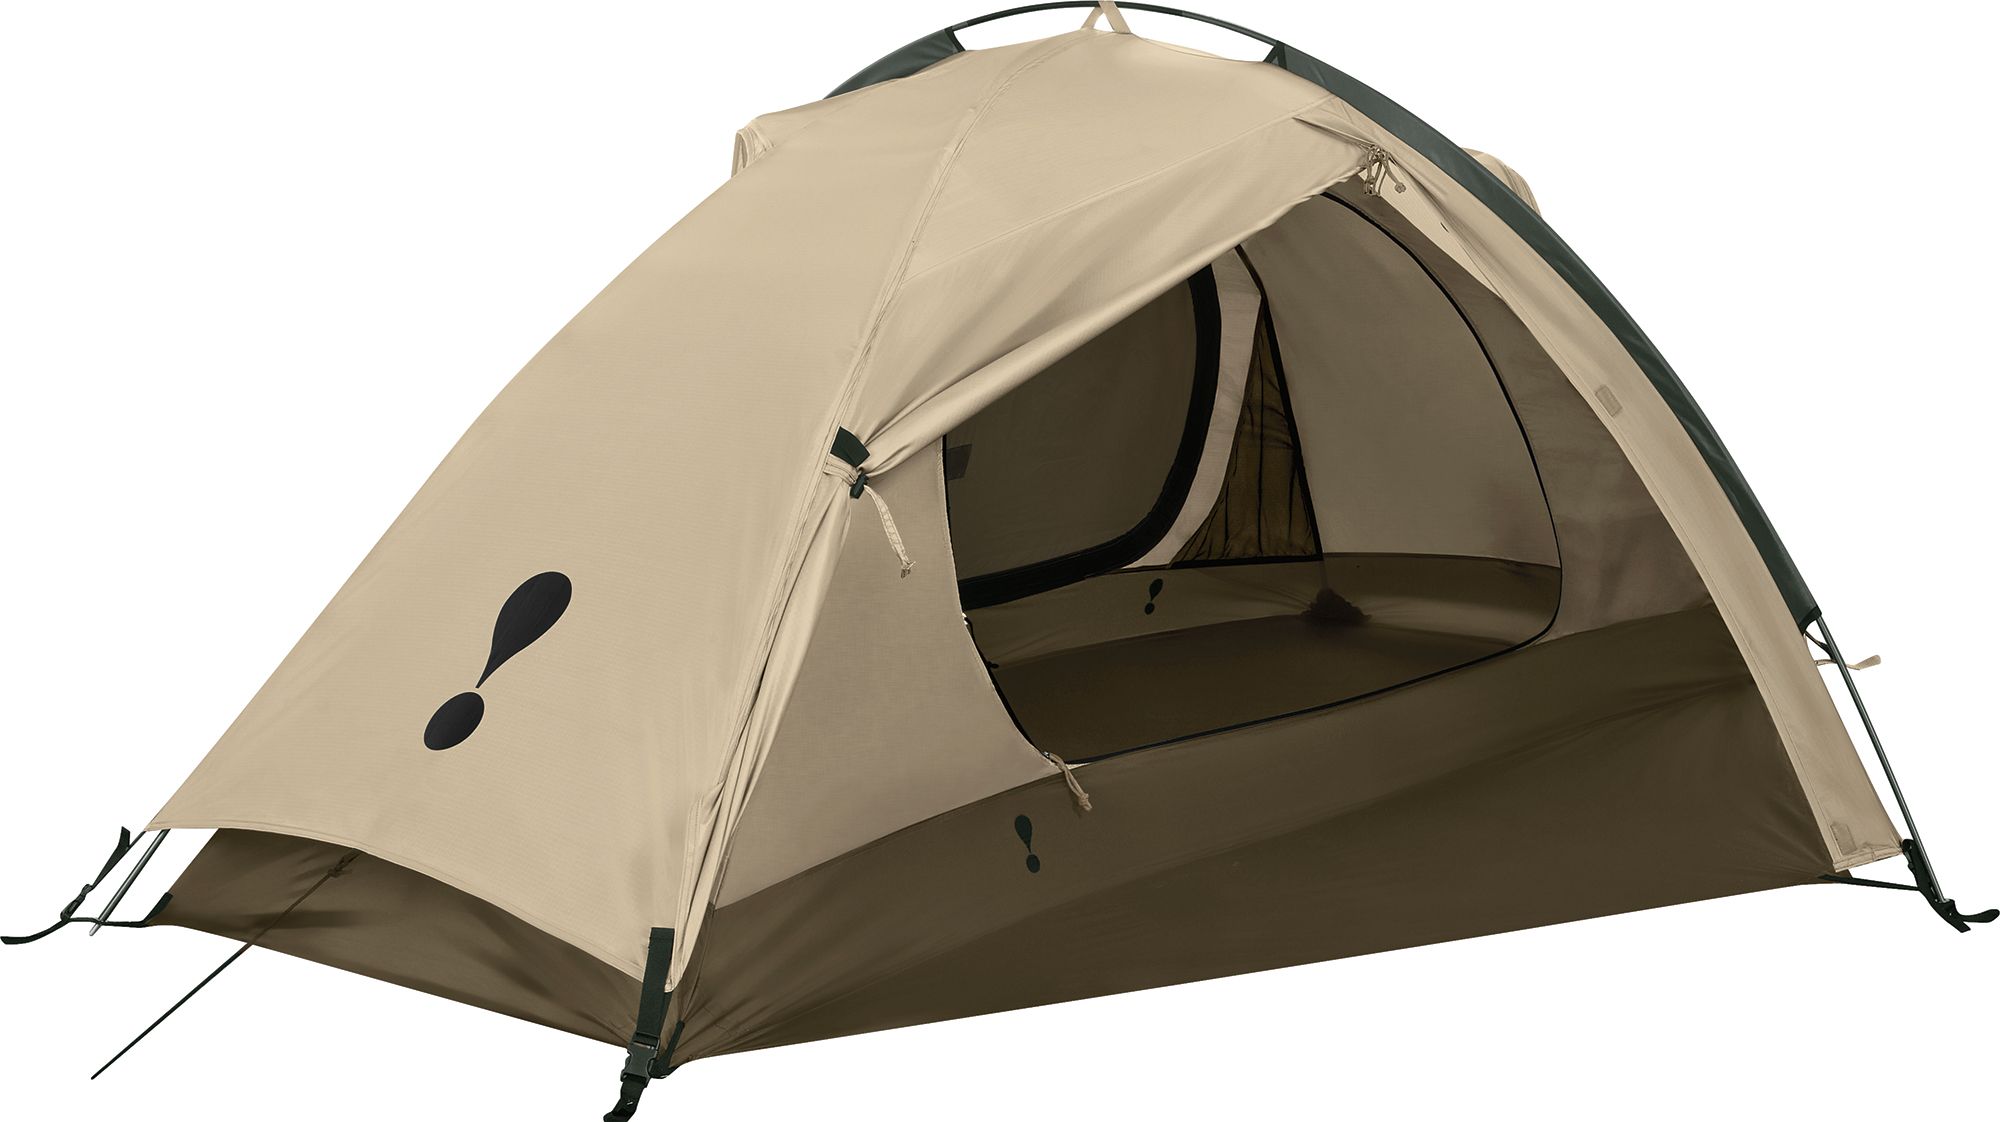 Camping Tents | DICK'S Sporting Goods